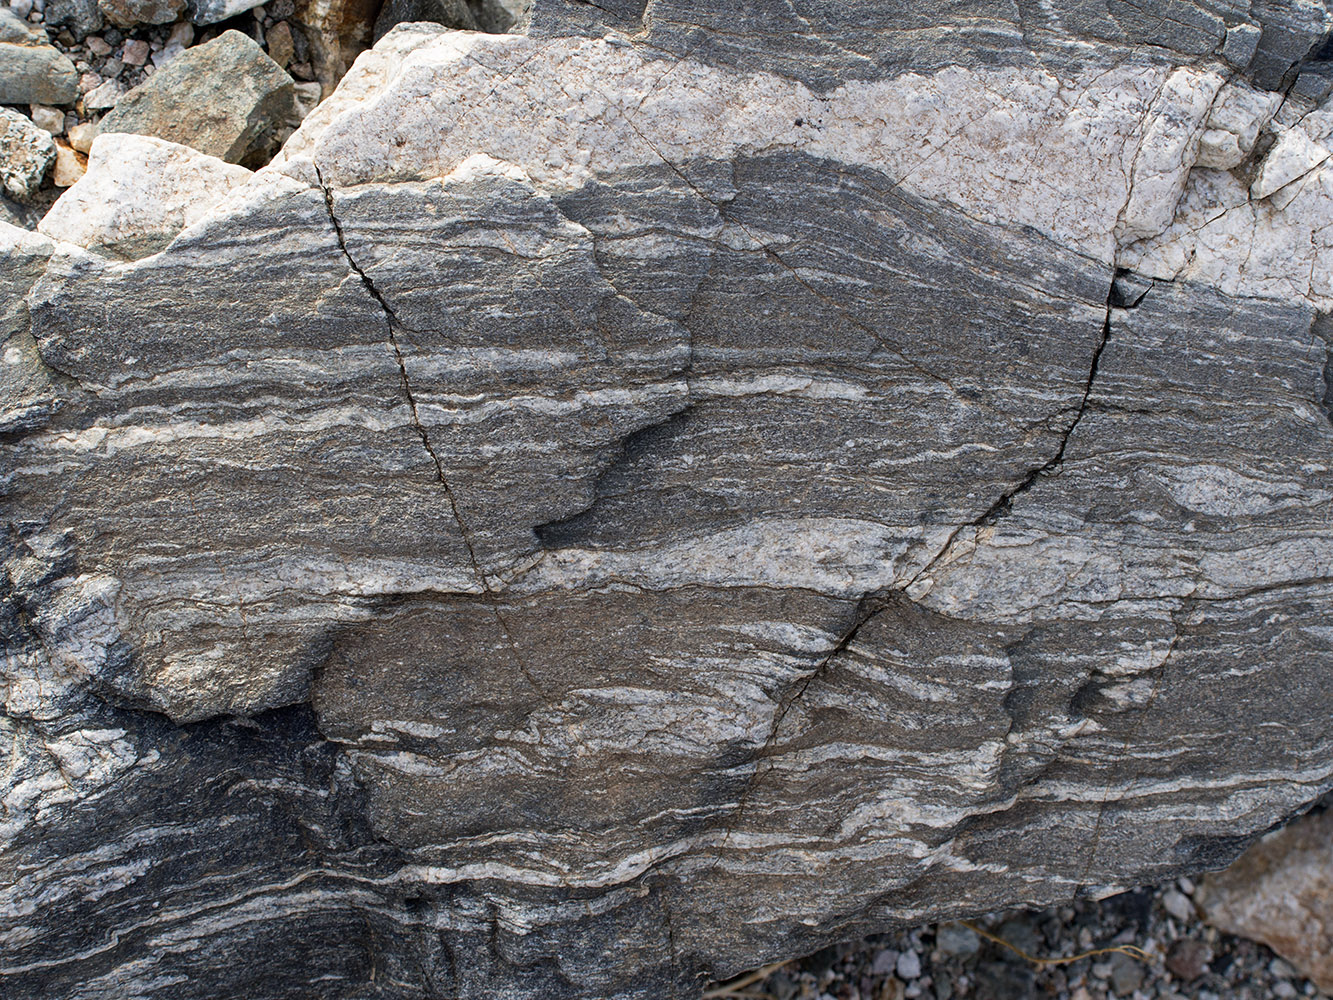 Badwater turtleback fault area metamorphic rock:  Gneiss with fractures and pegmatite intrusions